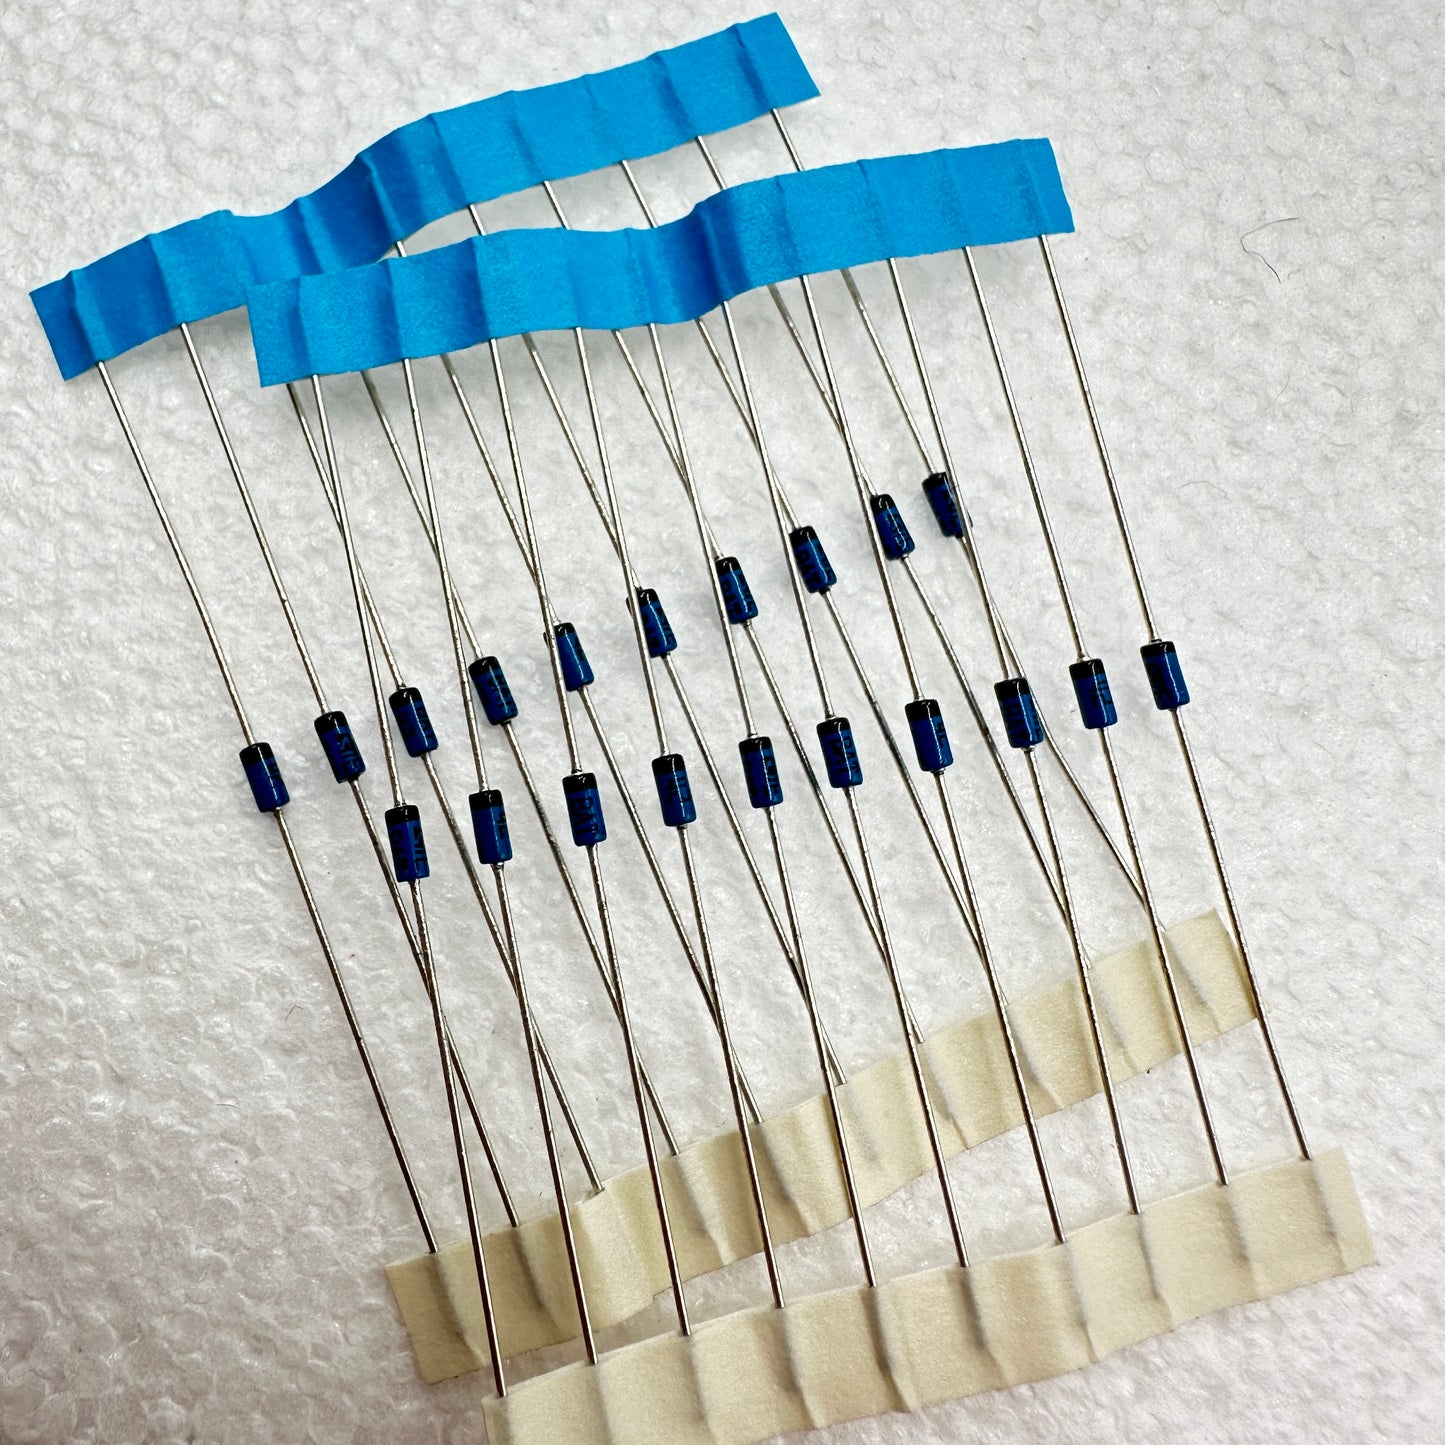 10 PACK BAT42 Silicon Schottky Barrier Diode ST Original Clipping